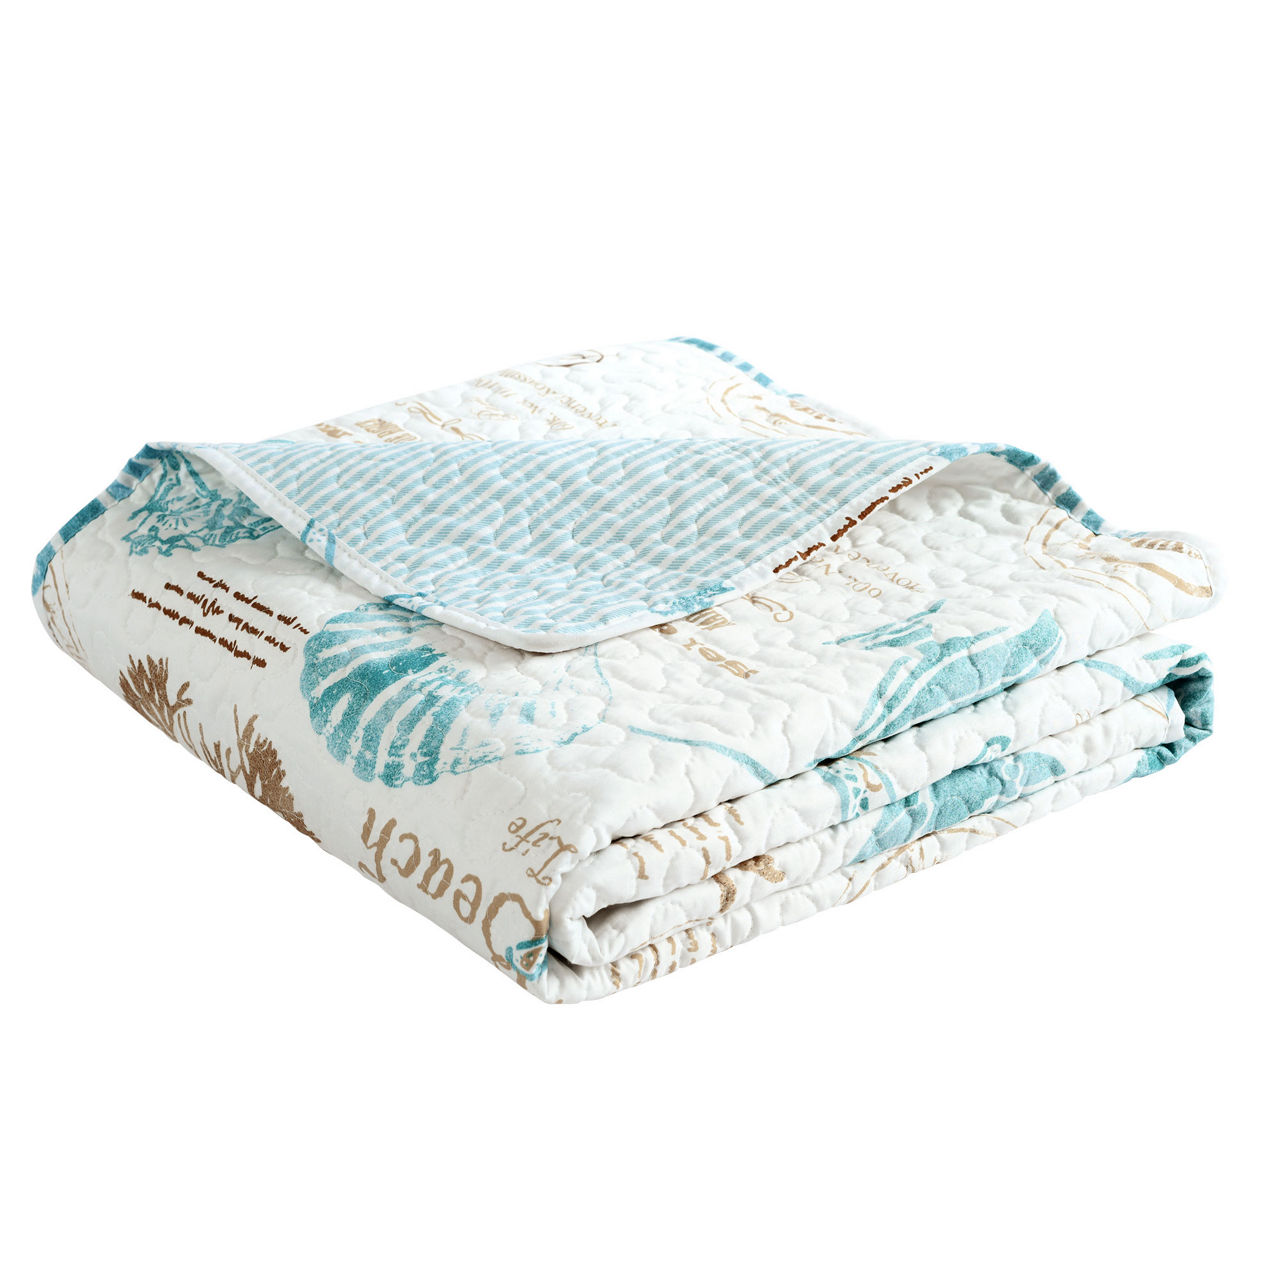 Lush Decor White & Blue Harbor Life Quilted Throw, (50